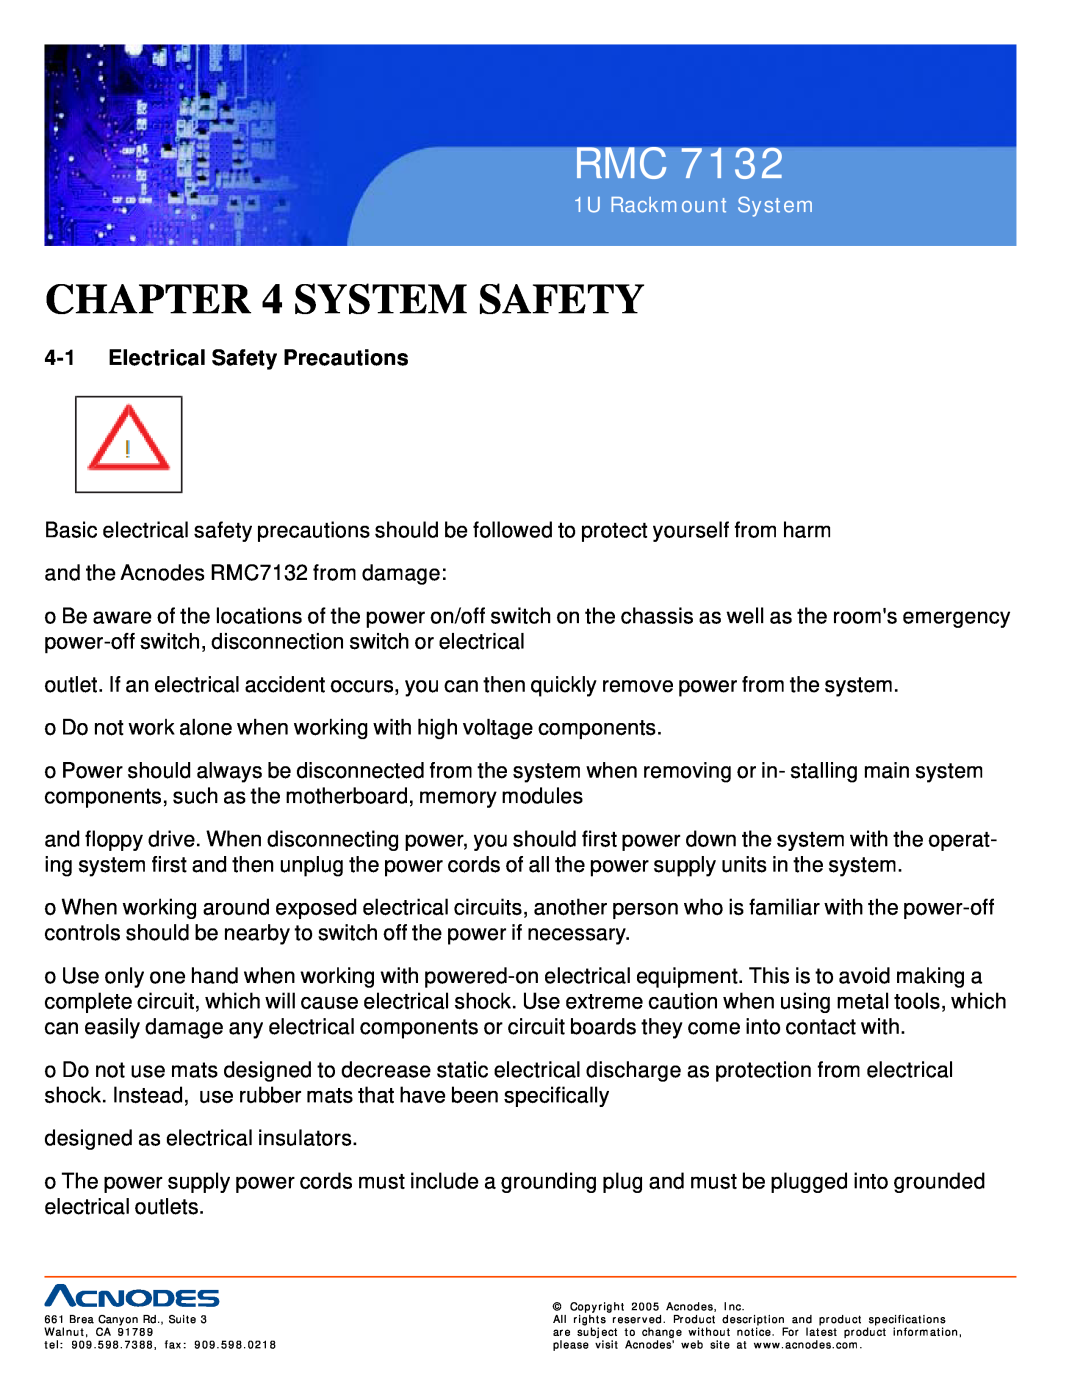 Acnodes RMC 7132 user manual System Safety, Electrical Safety Precautions, 1U Rackmount System 